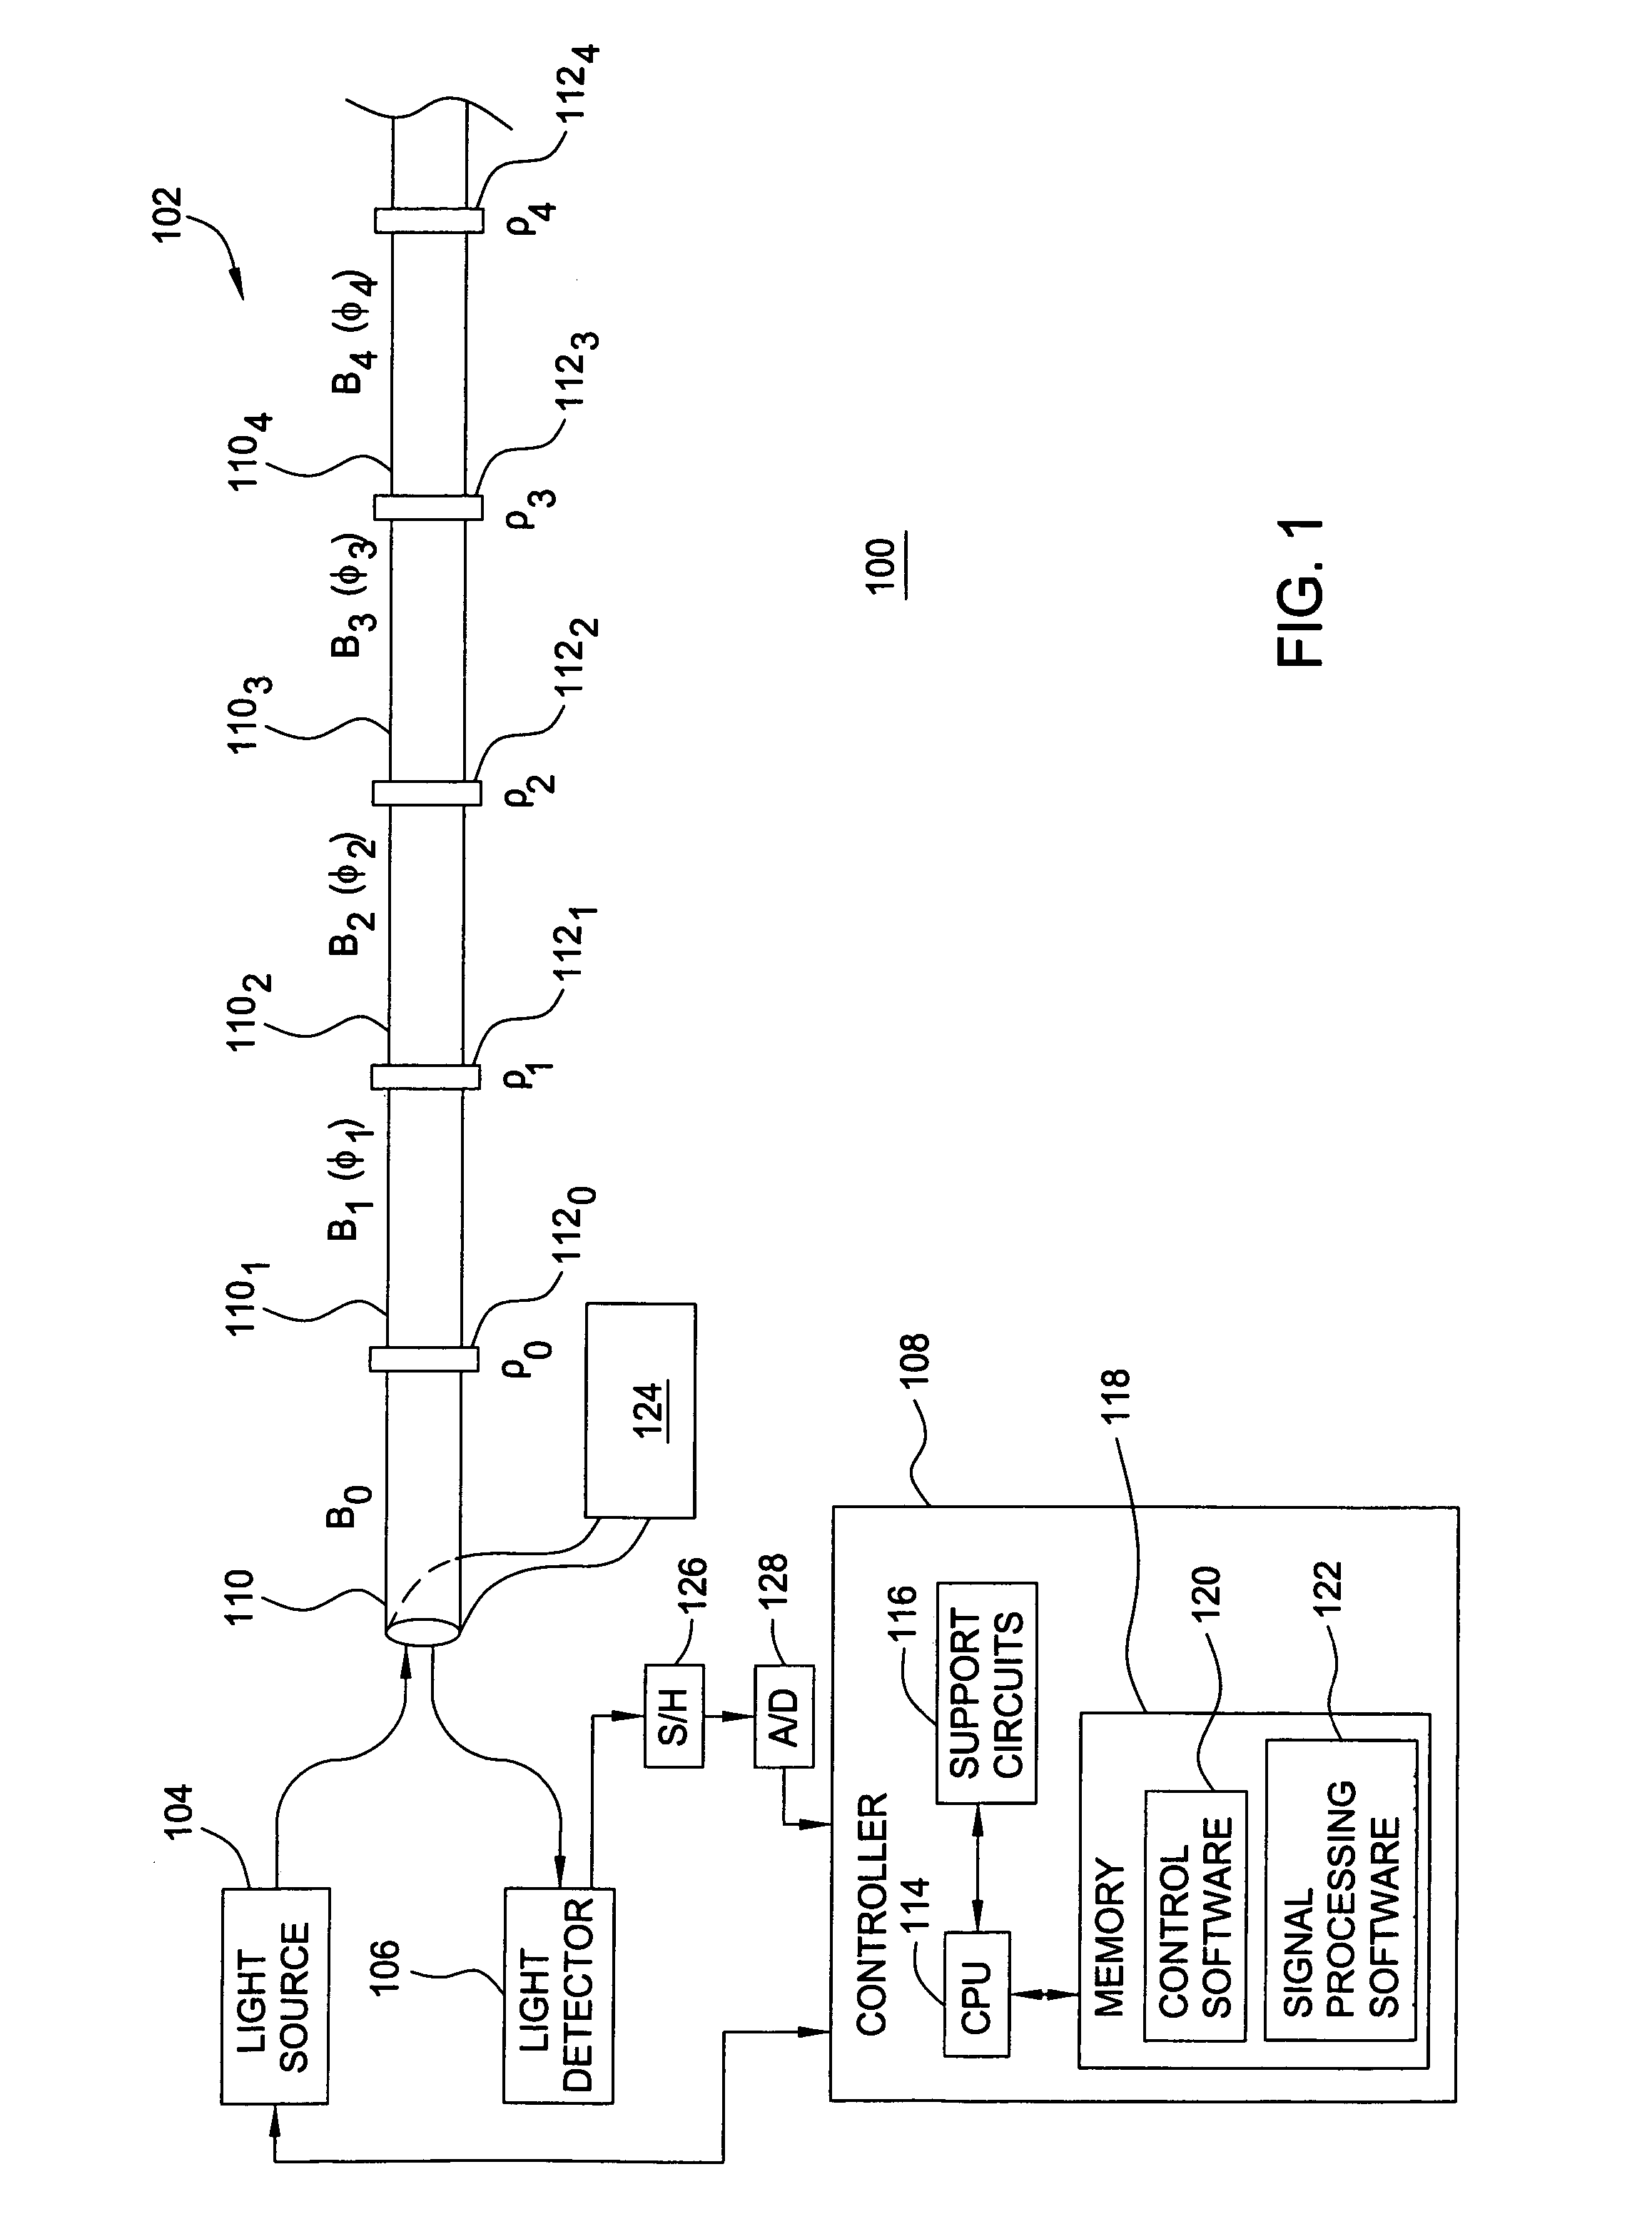 Method and apparatus for reducing crosstalk interference in an inline Fabry-Perot sensor array